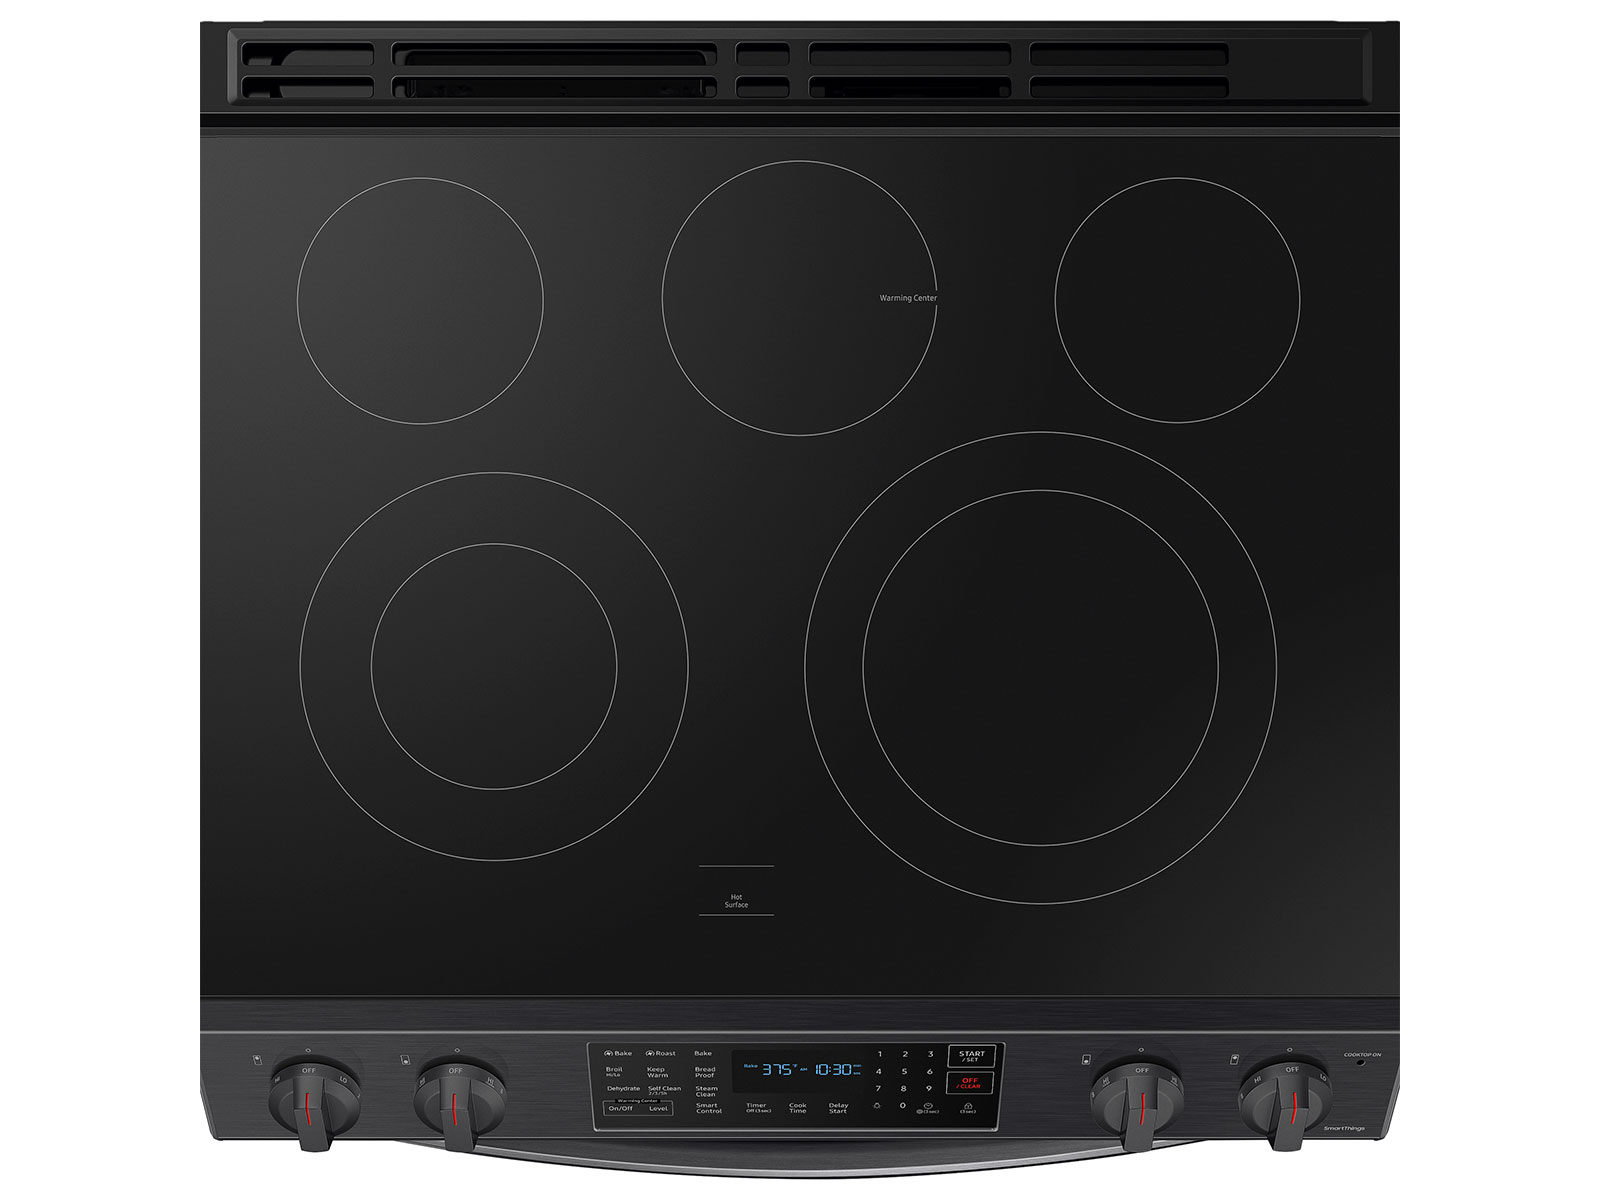 GE Universal Electric Range Oven Thermostat (Black) at